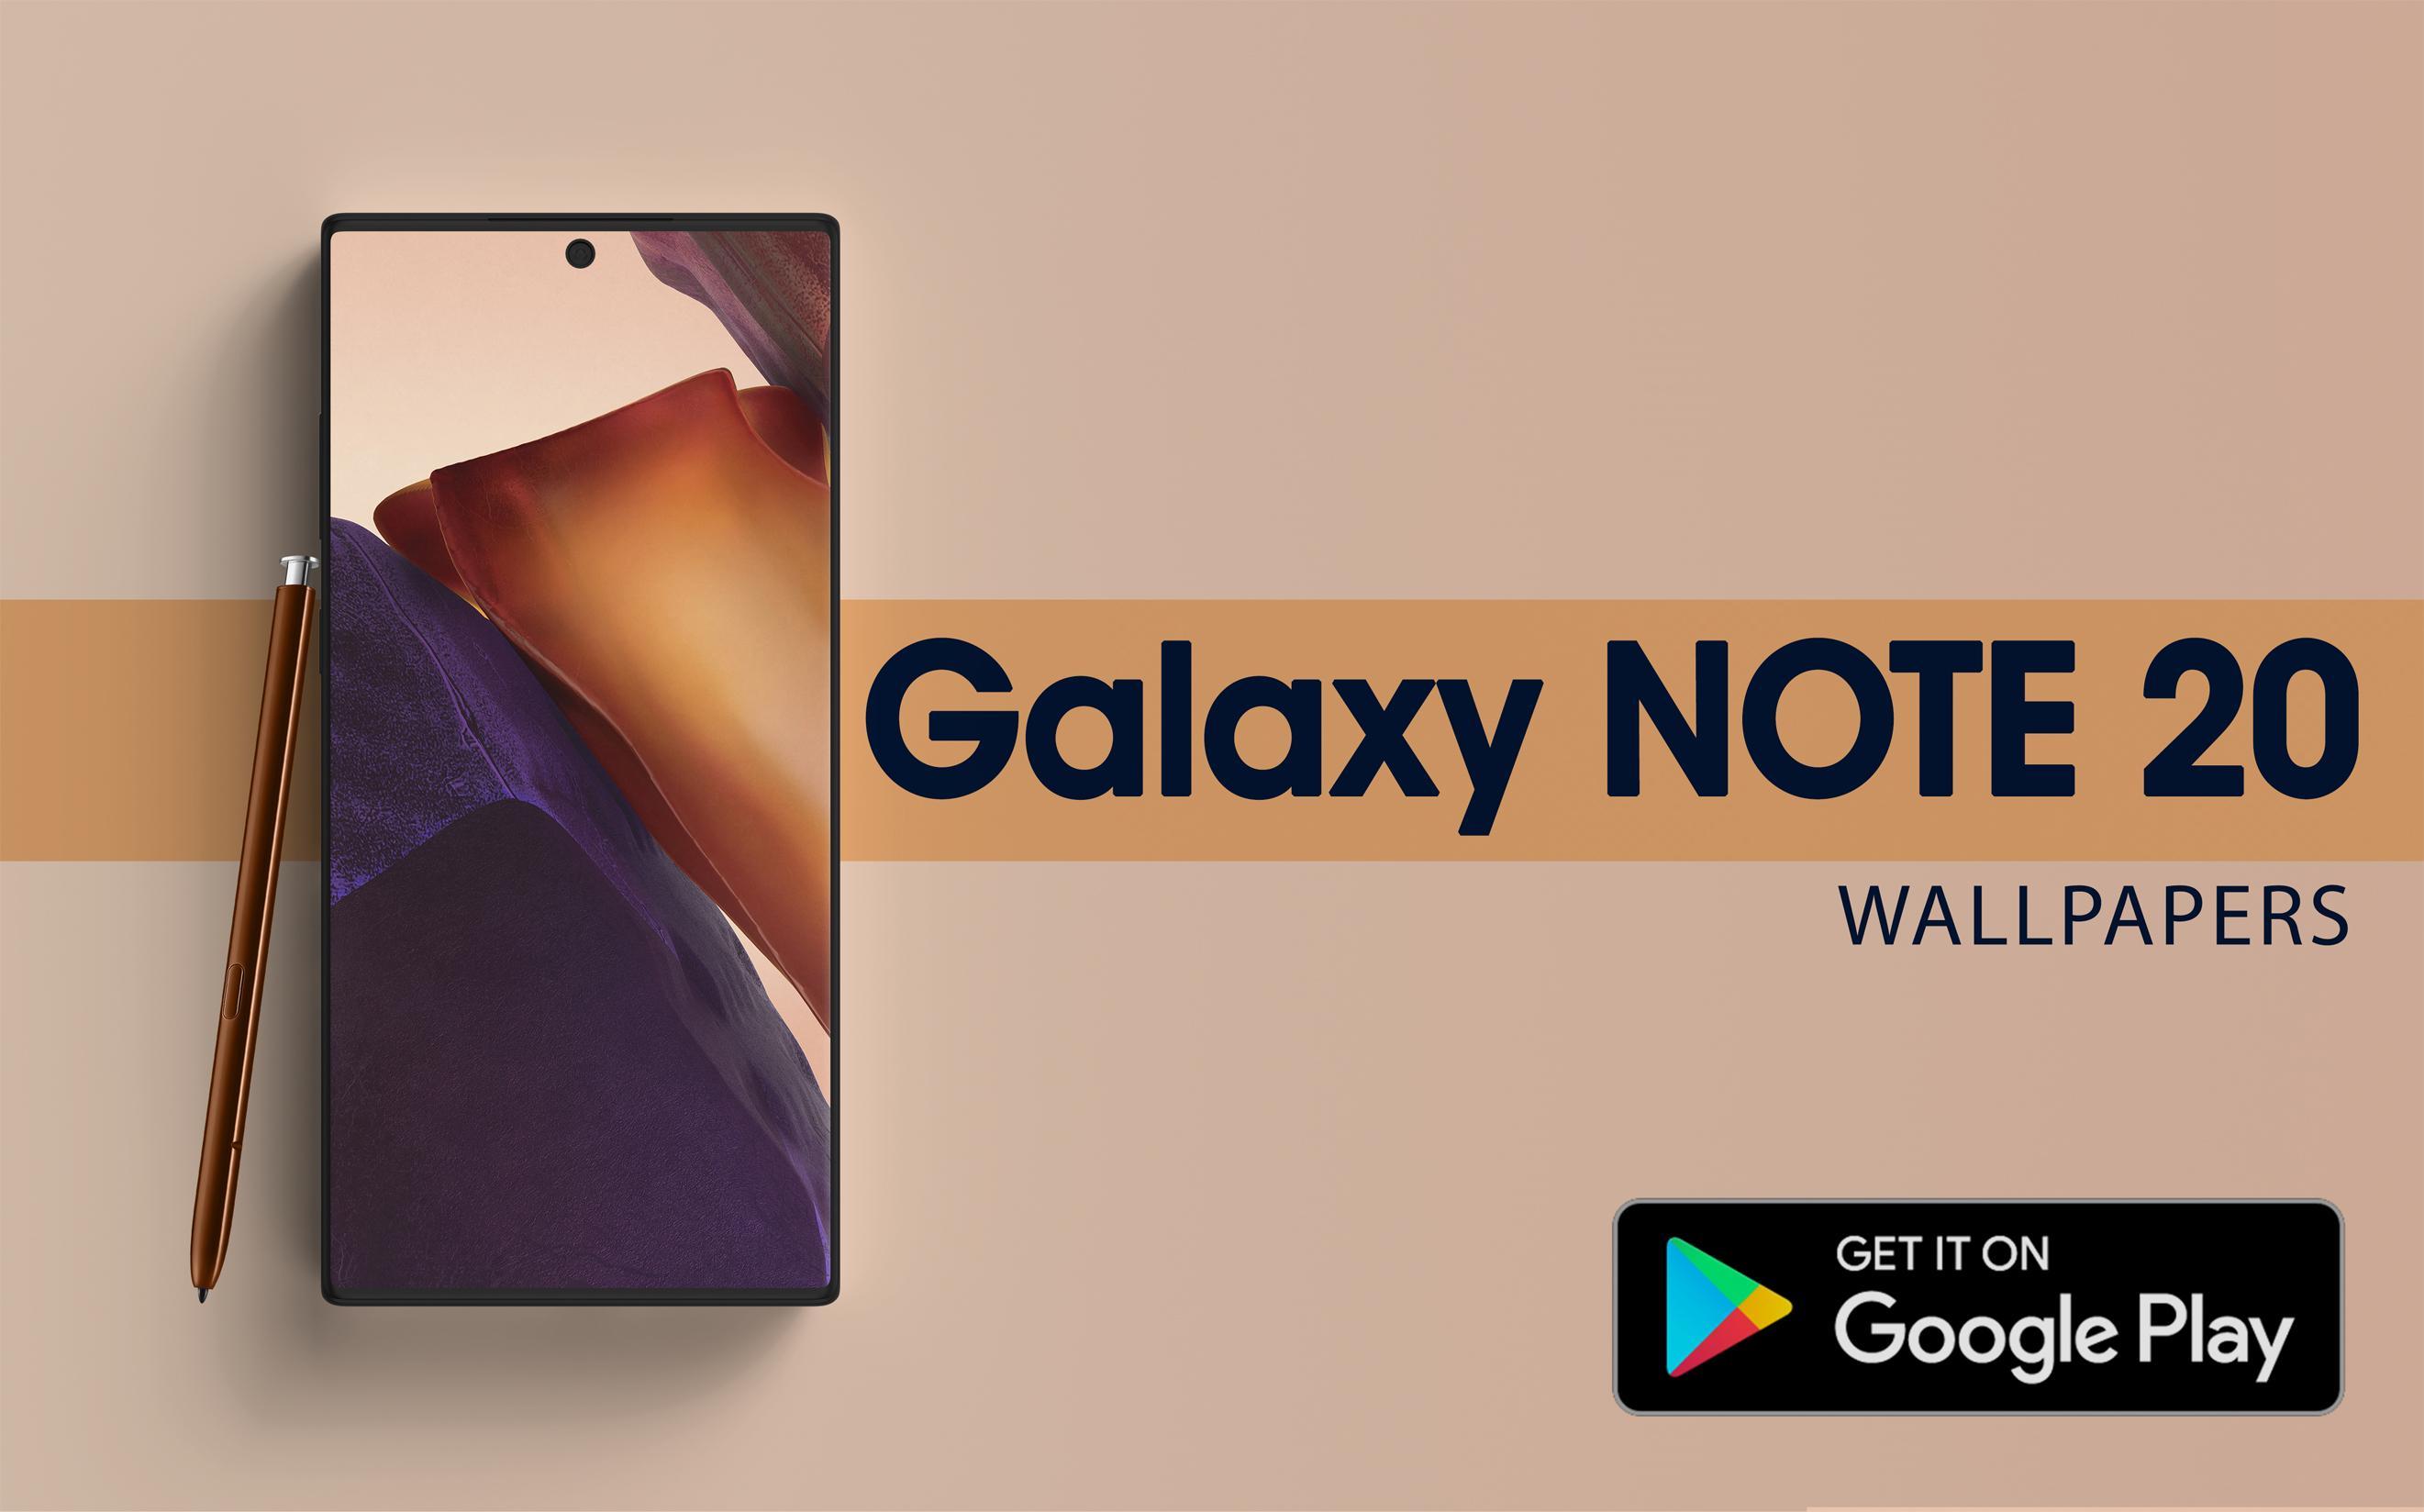 Galaxy Note 20 Wallpapers